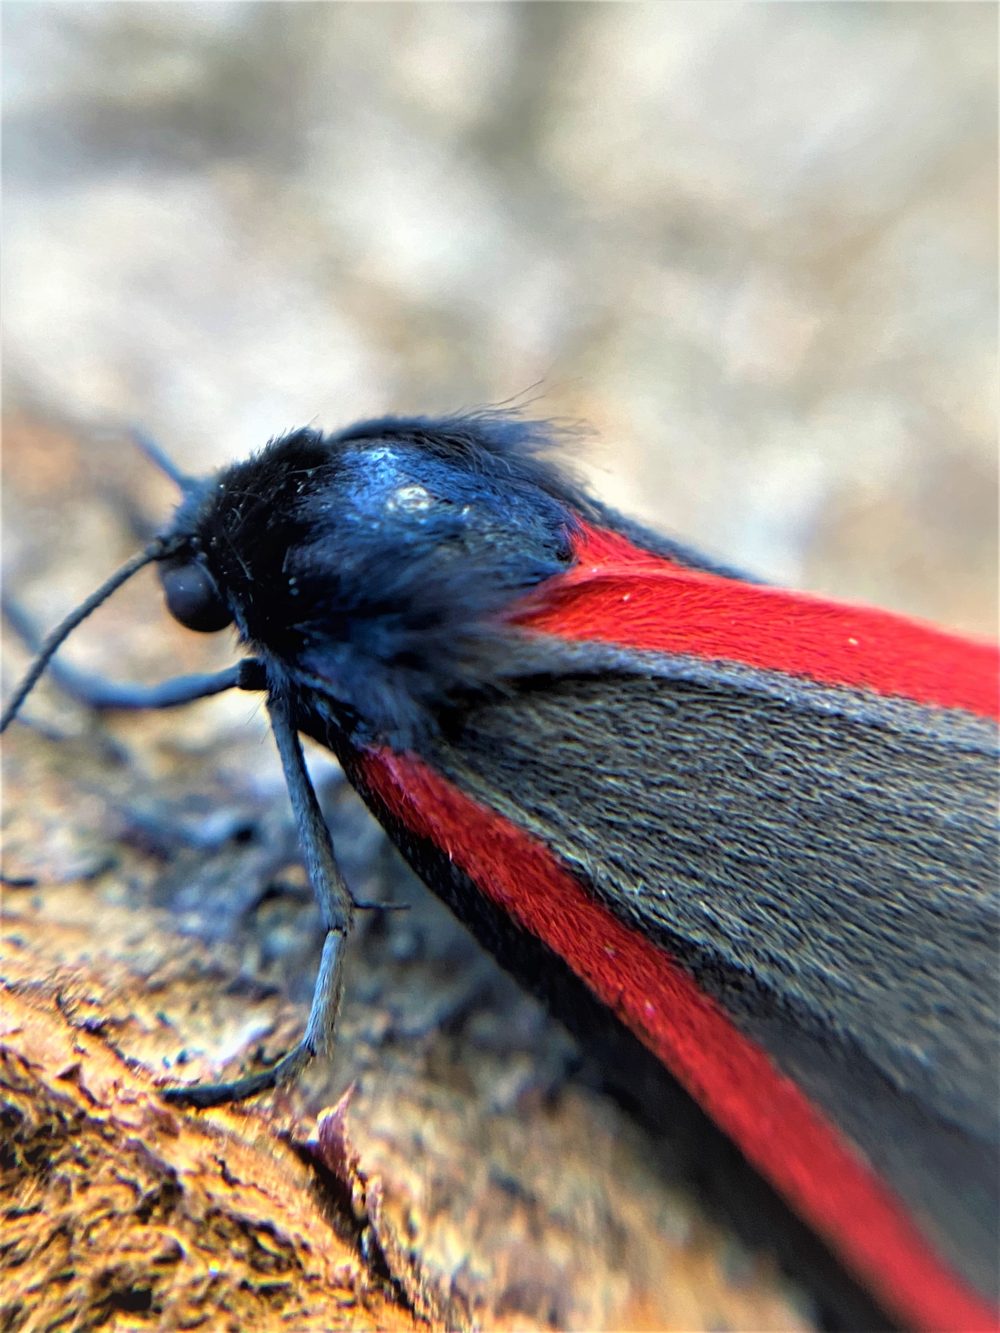 Photograph of a purdy moth.